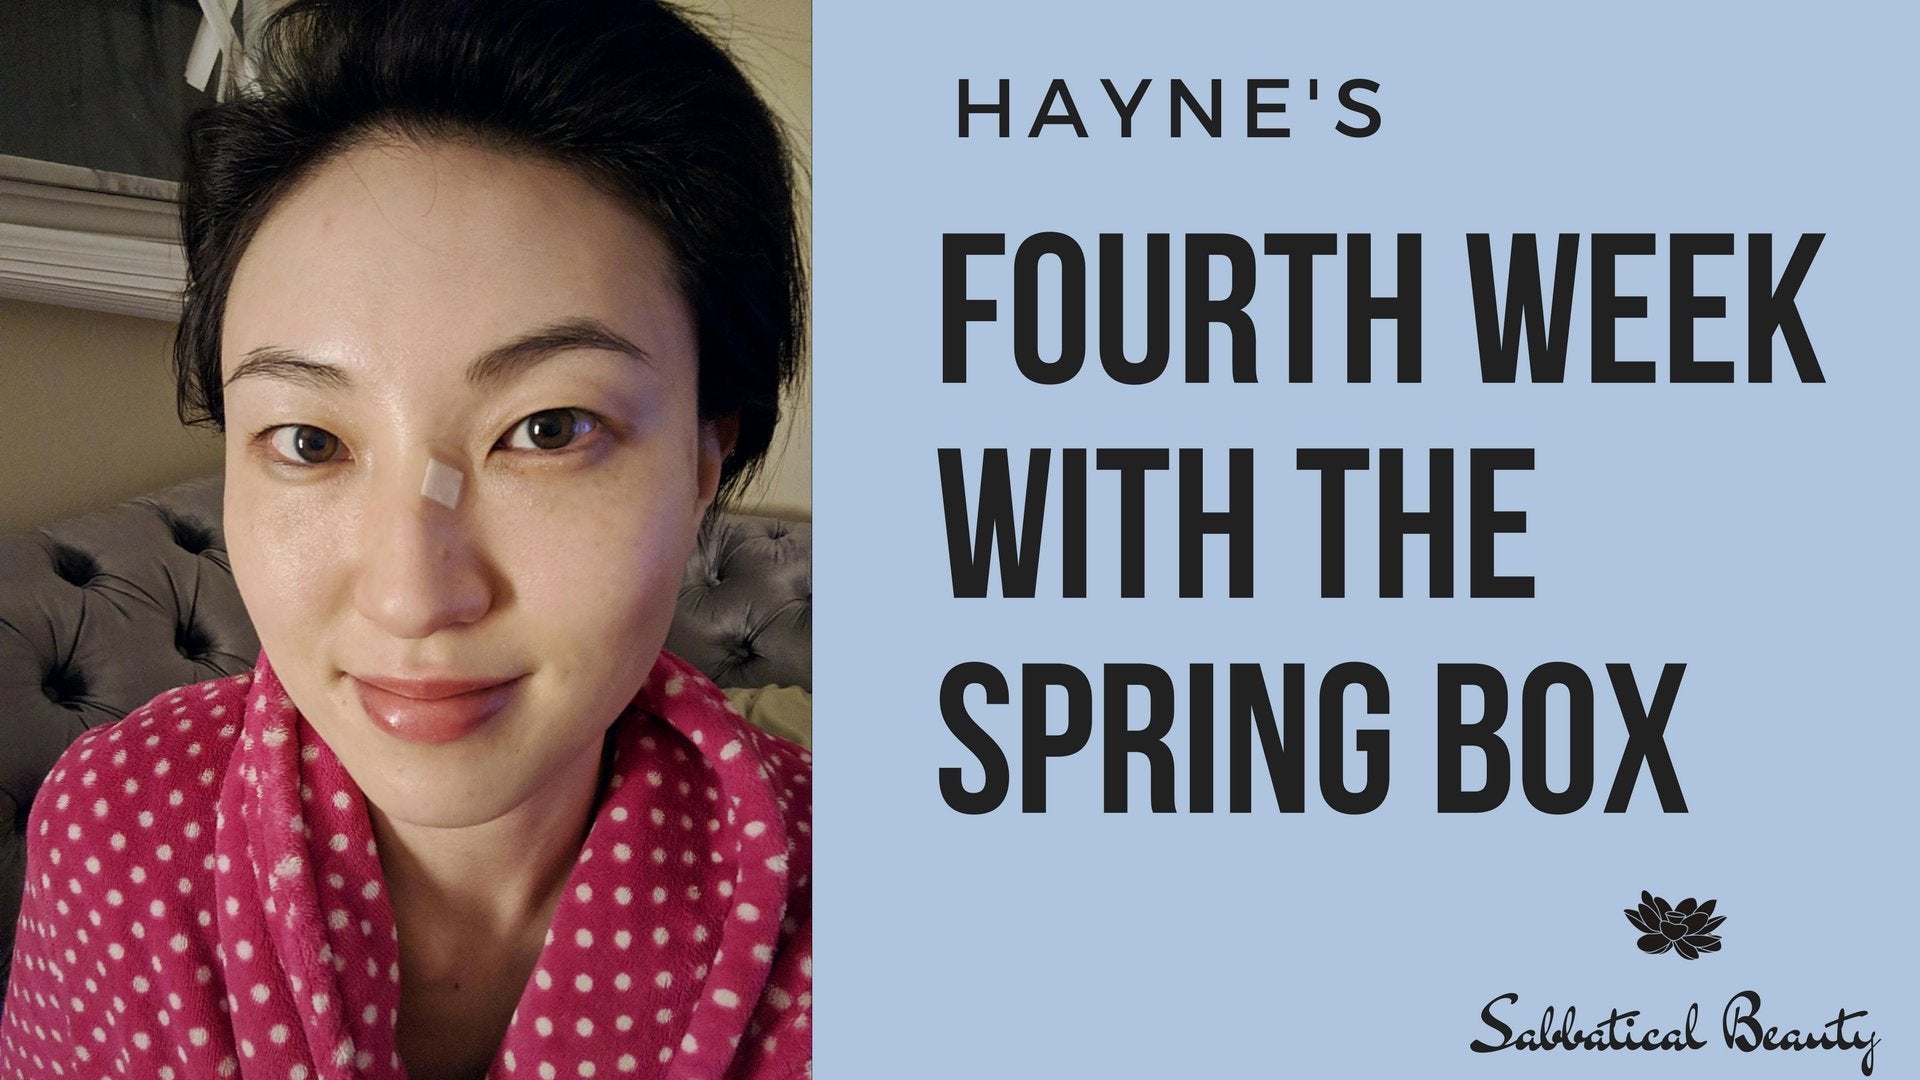 Hayne's Fourth Week With the Spring Box - Sabbatical Beauty